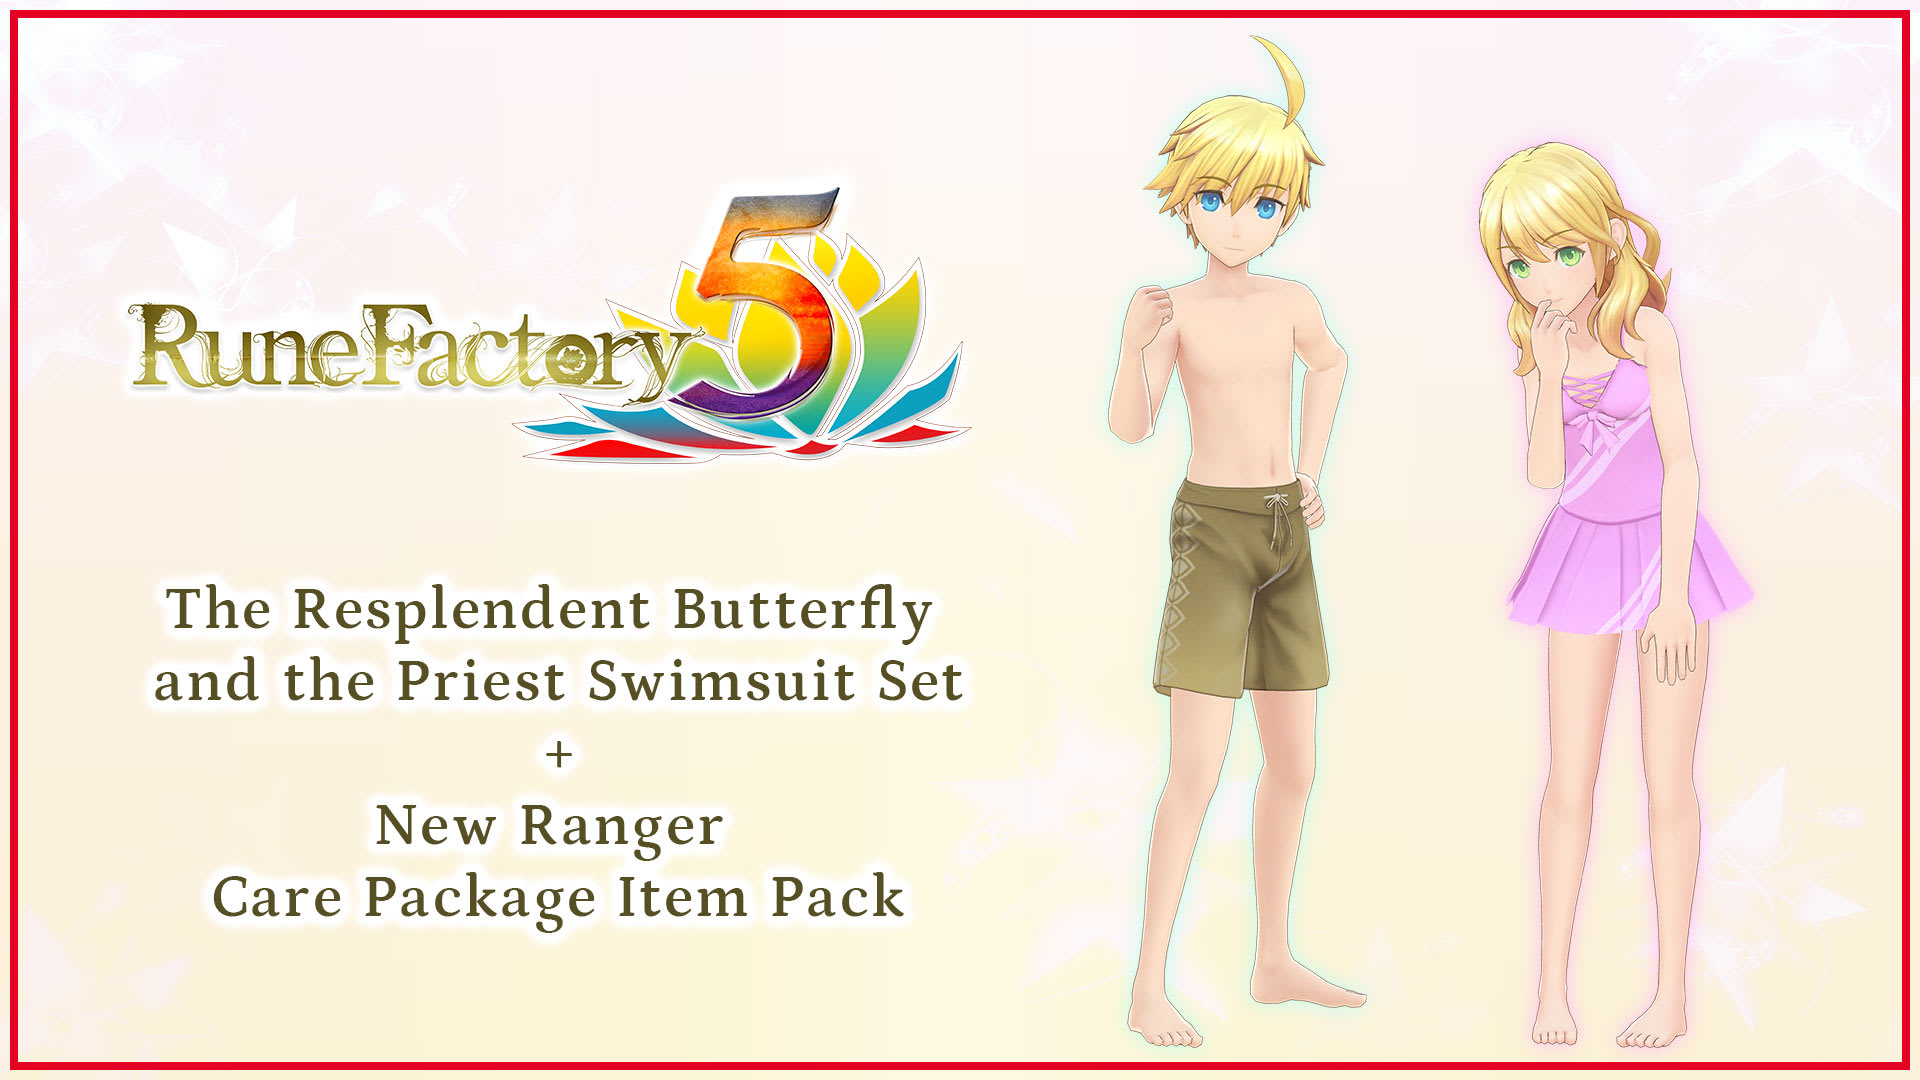 The Resplendent Butterfly and the Priest Swimsuit Set + New Ranger Care Package Item Pack